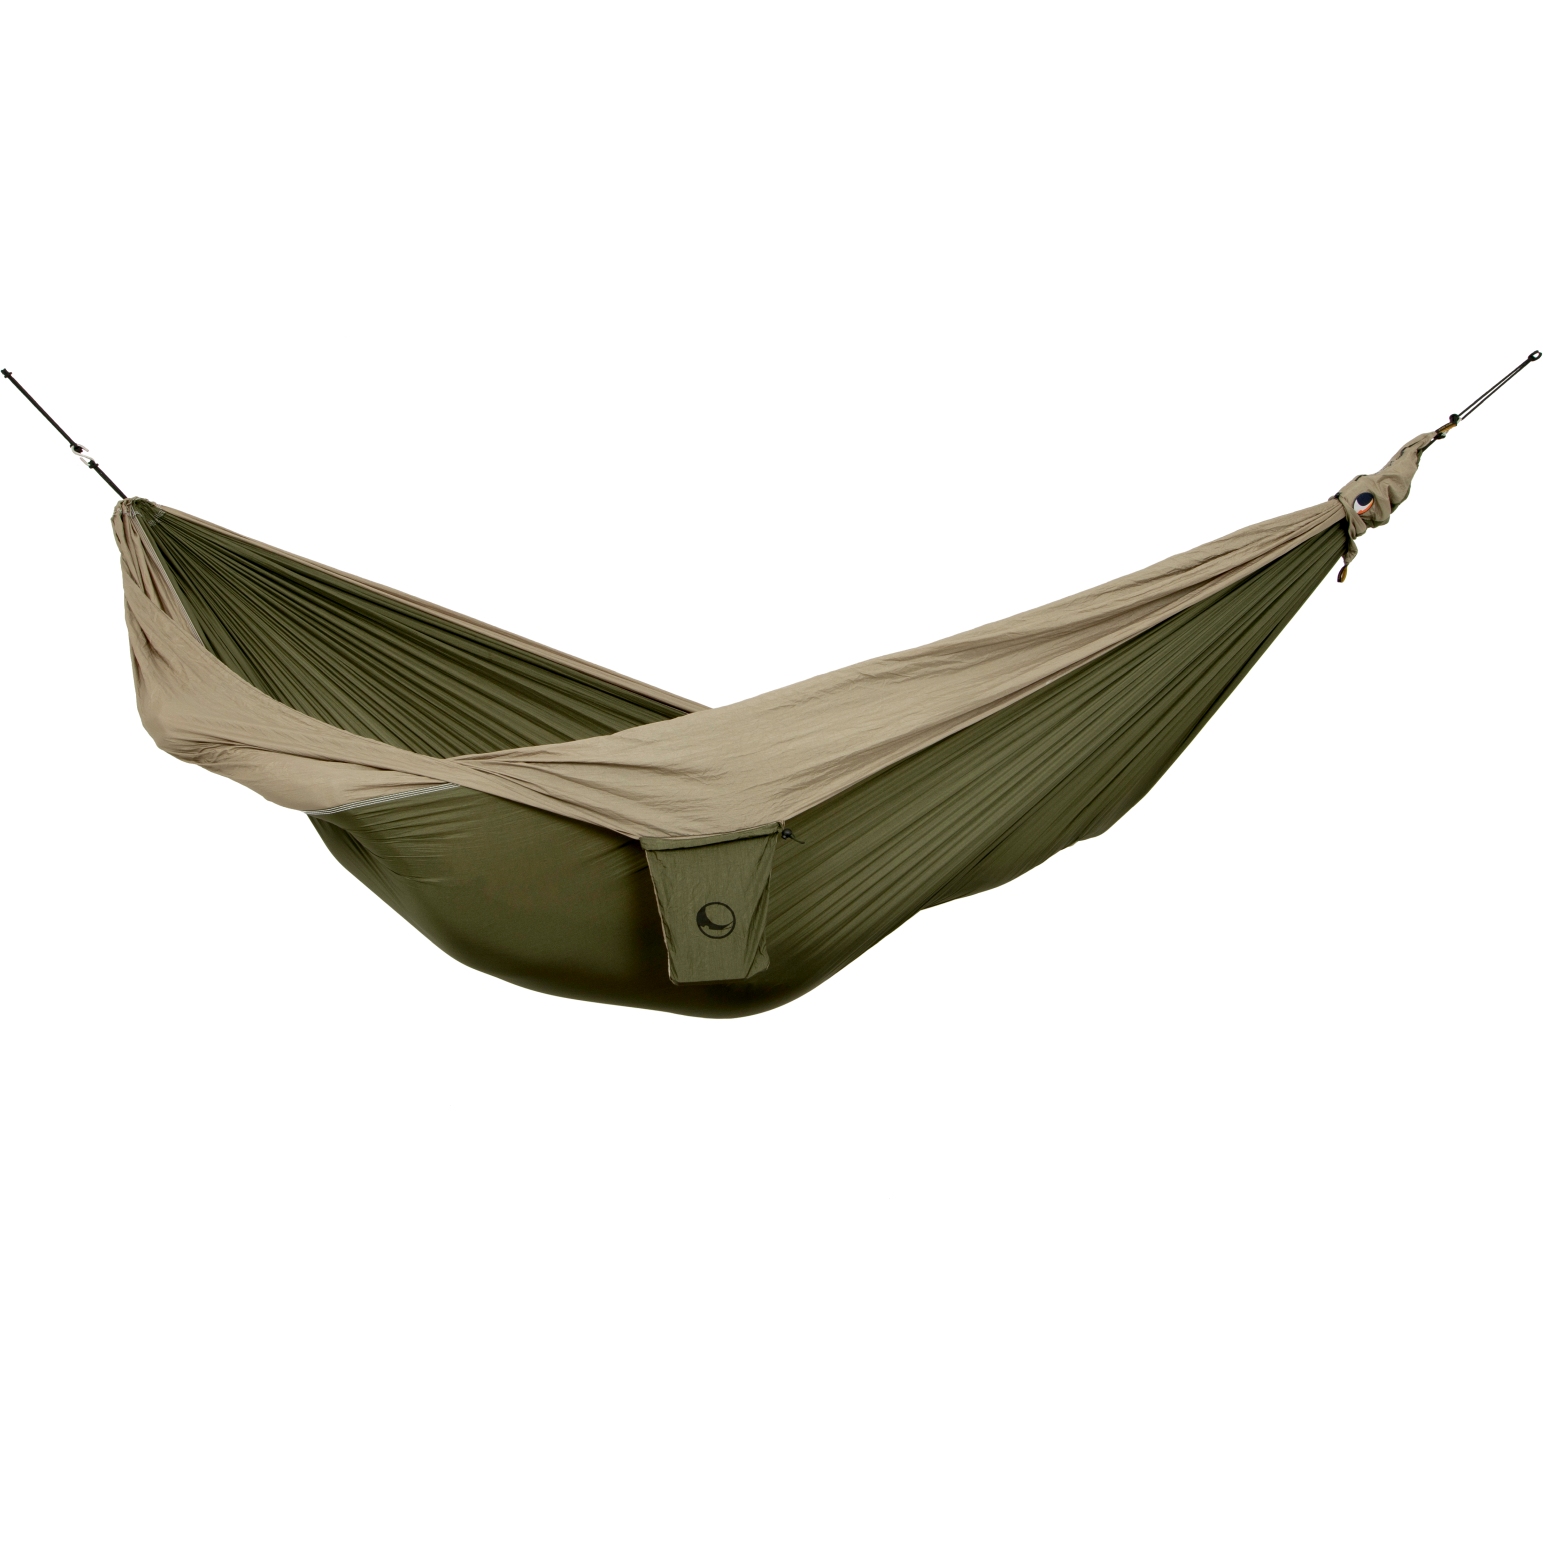 Picture of Ticket To The Moon Travel Hammock - Original - Army Green / Brown